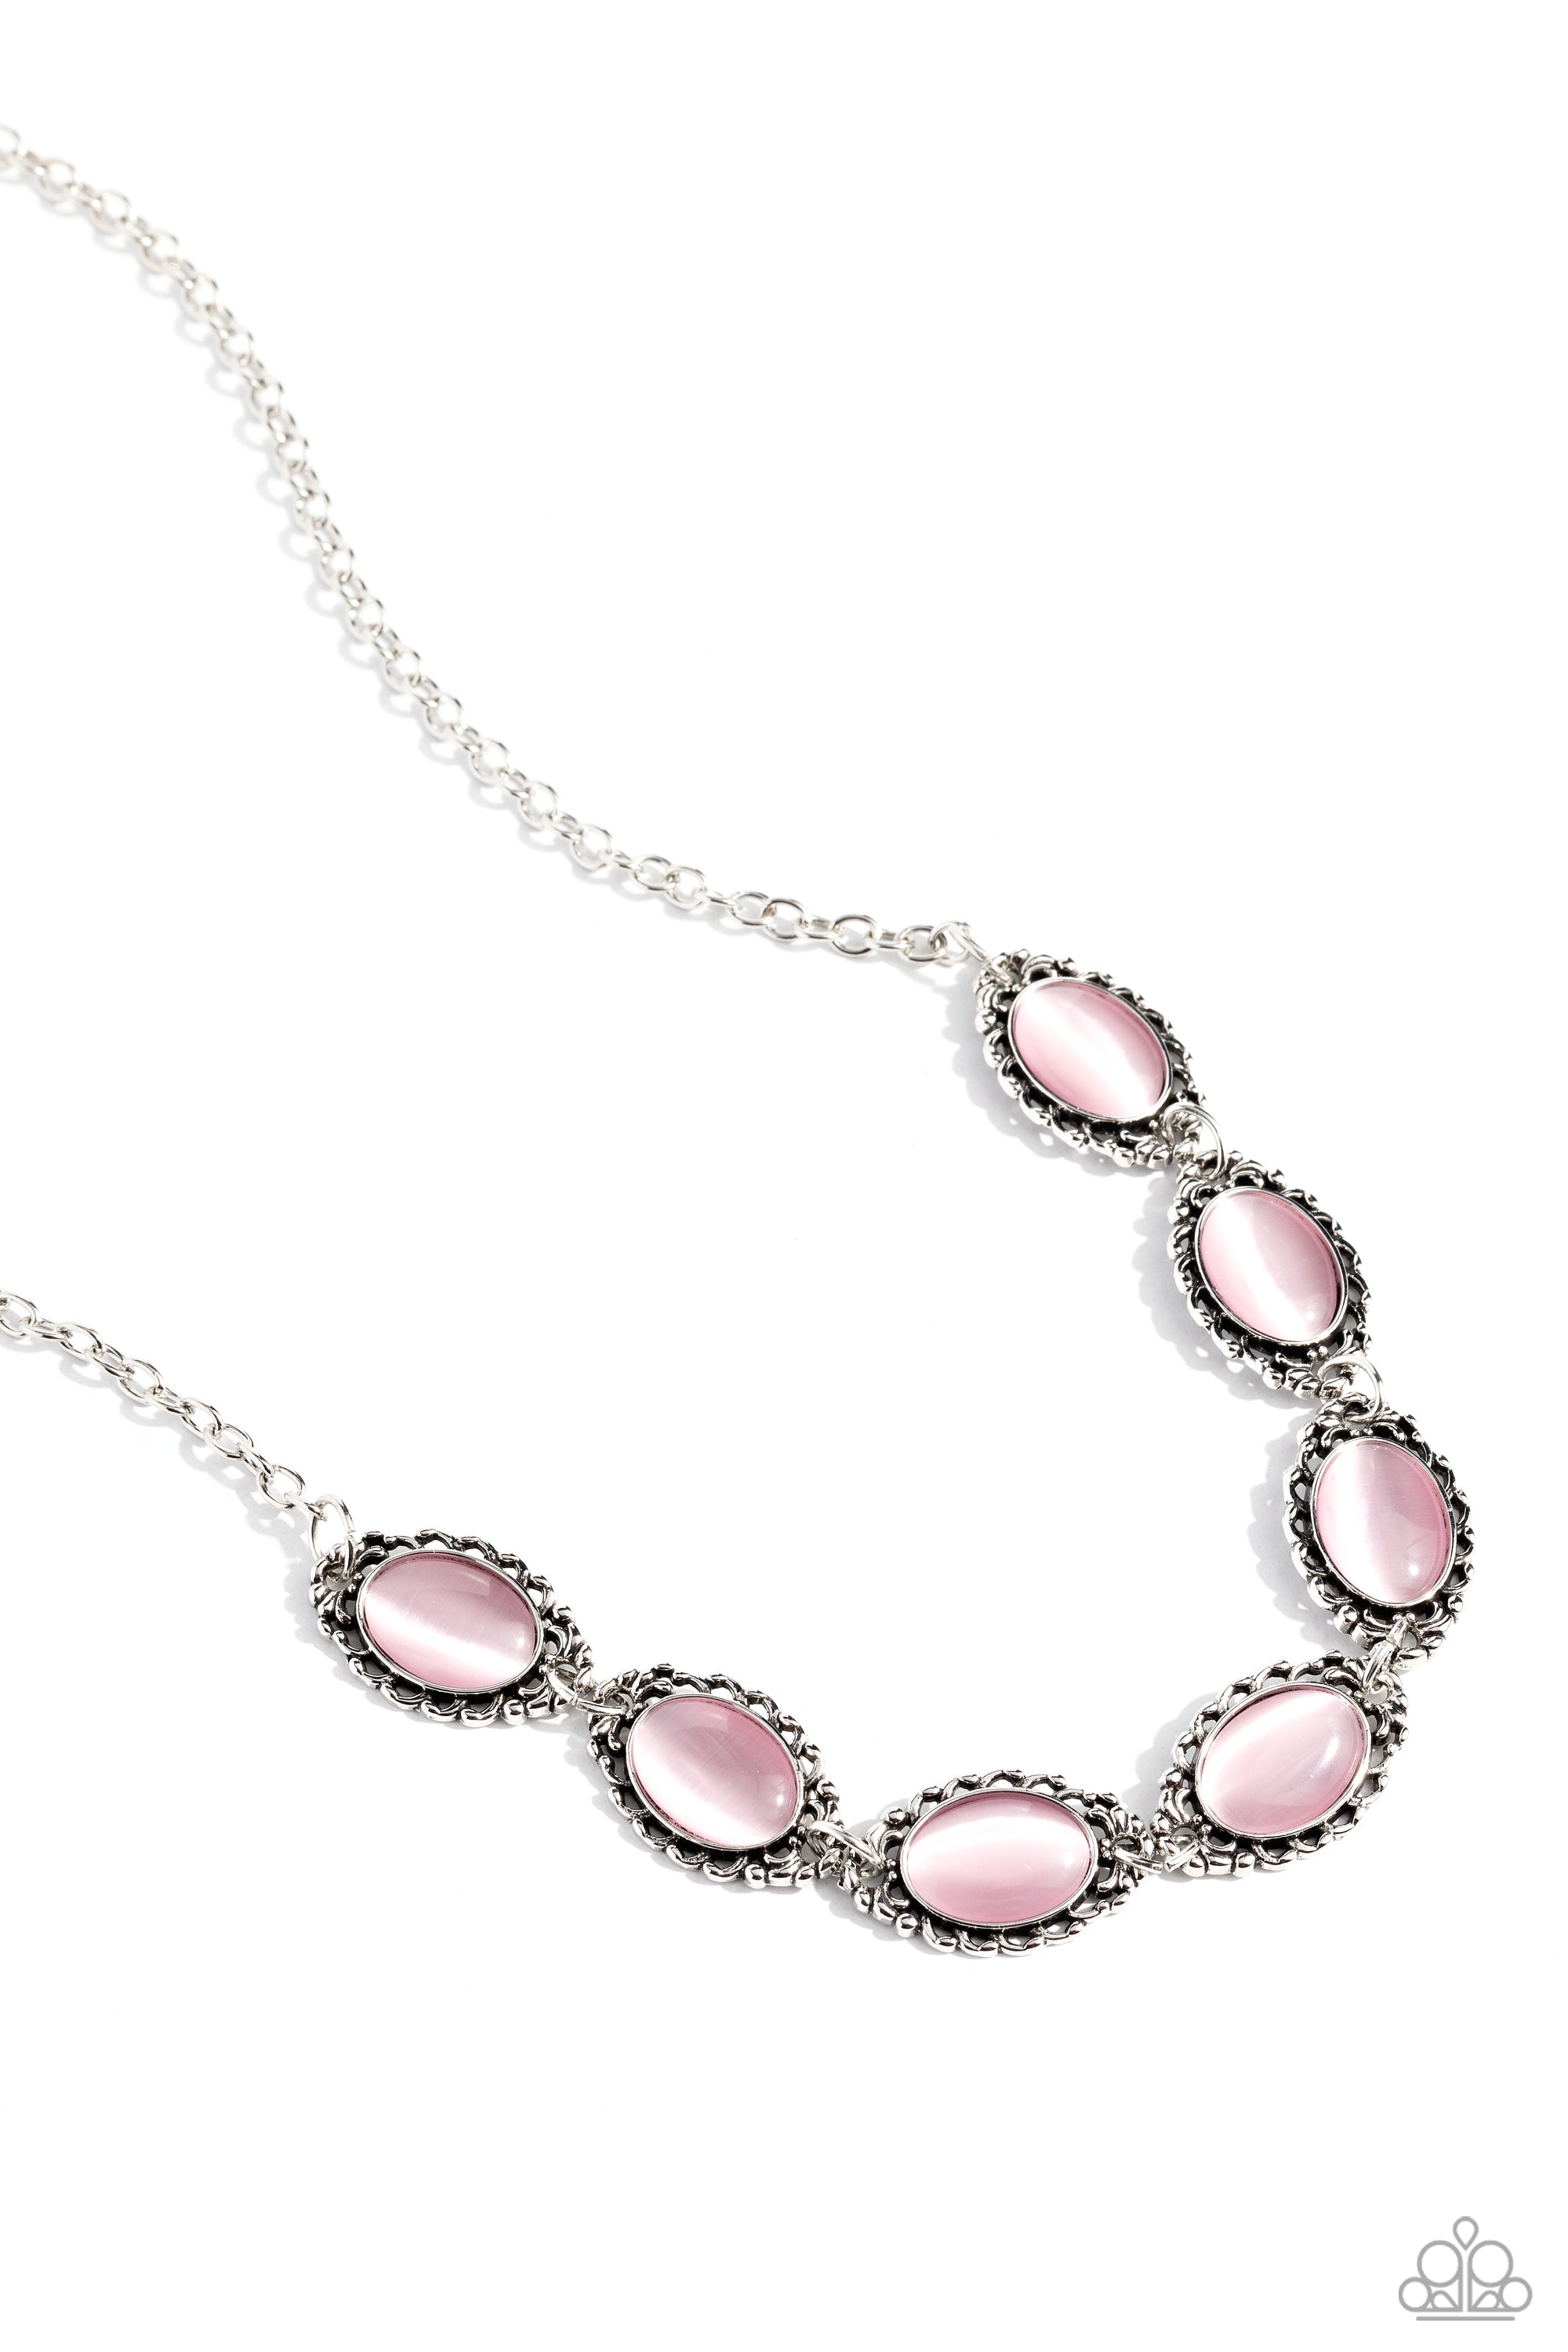 Framed in France Pink Cat's Eye Stone Necklace - Paparazzi Accessories- lightbox - CarasShop.com - $5 Jewelry by Cara Jewels